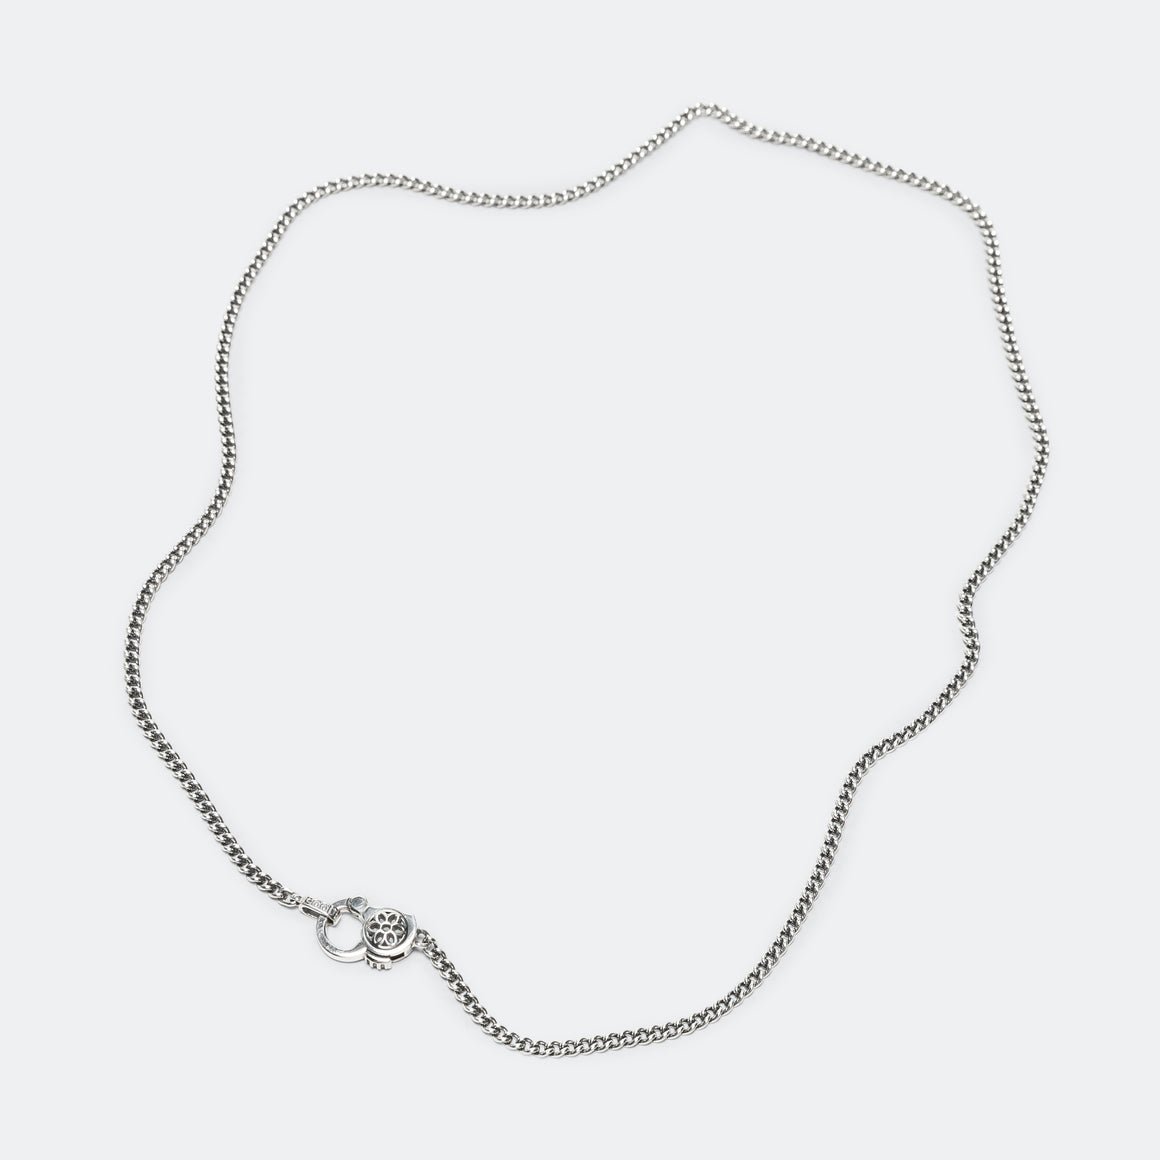 Curb Chain Necklace - 4A - 925 Silver